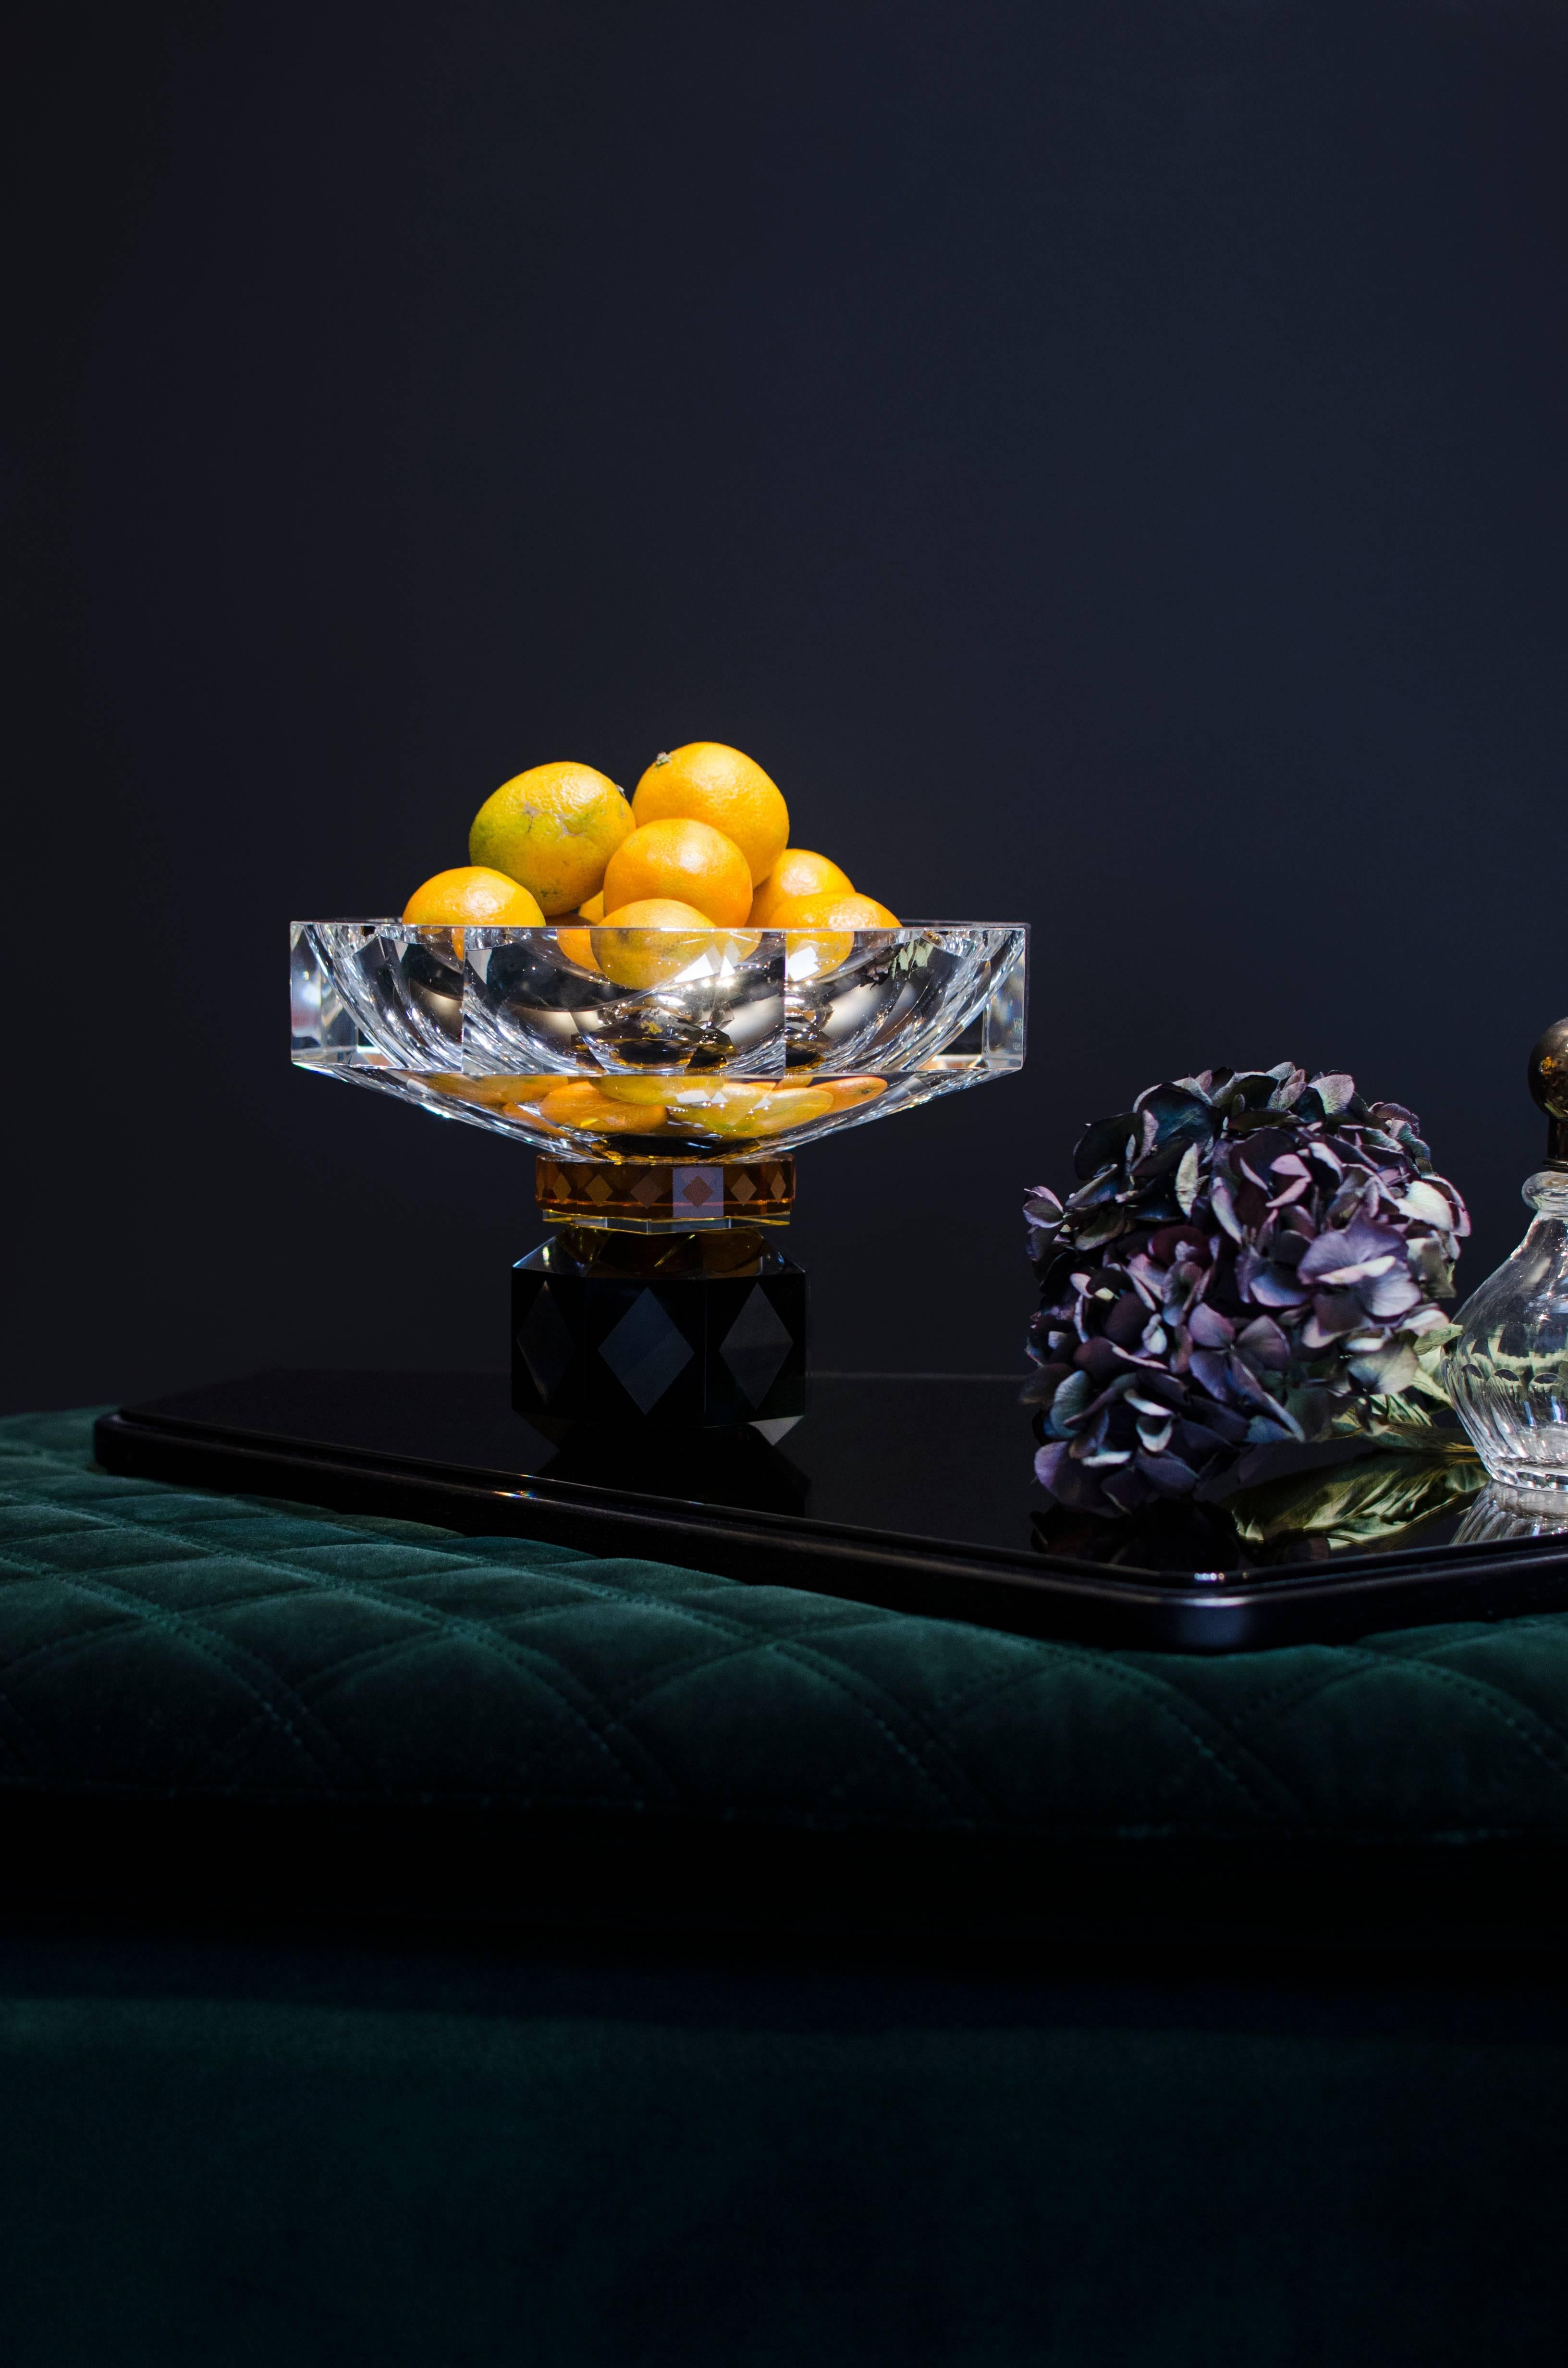 Arizona bowl
Decorative bowl
Handsculpted in crystal
Measures: L 22, H 17,4 D 22 cm

Reflections Copenhagen, a collection of handmade decorative mirrors and Crystal pieces, finely balanced to challenge the traditional styles and shapes of